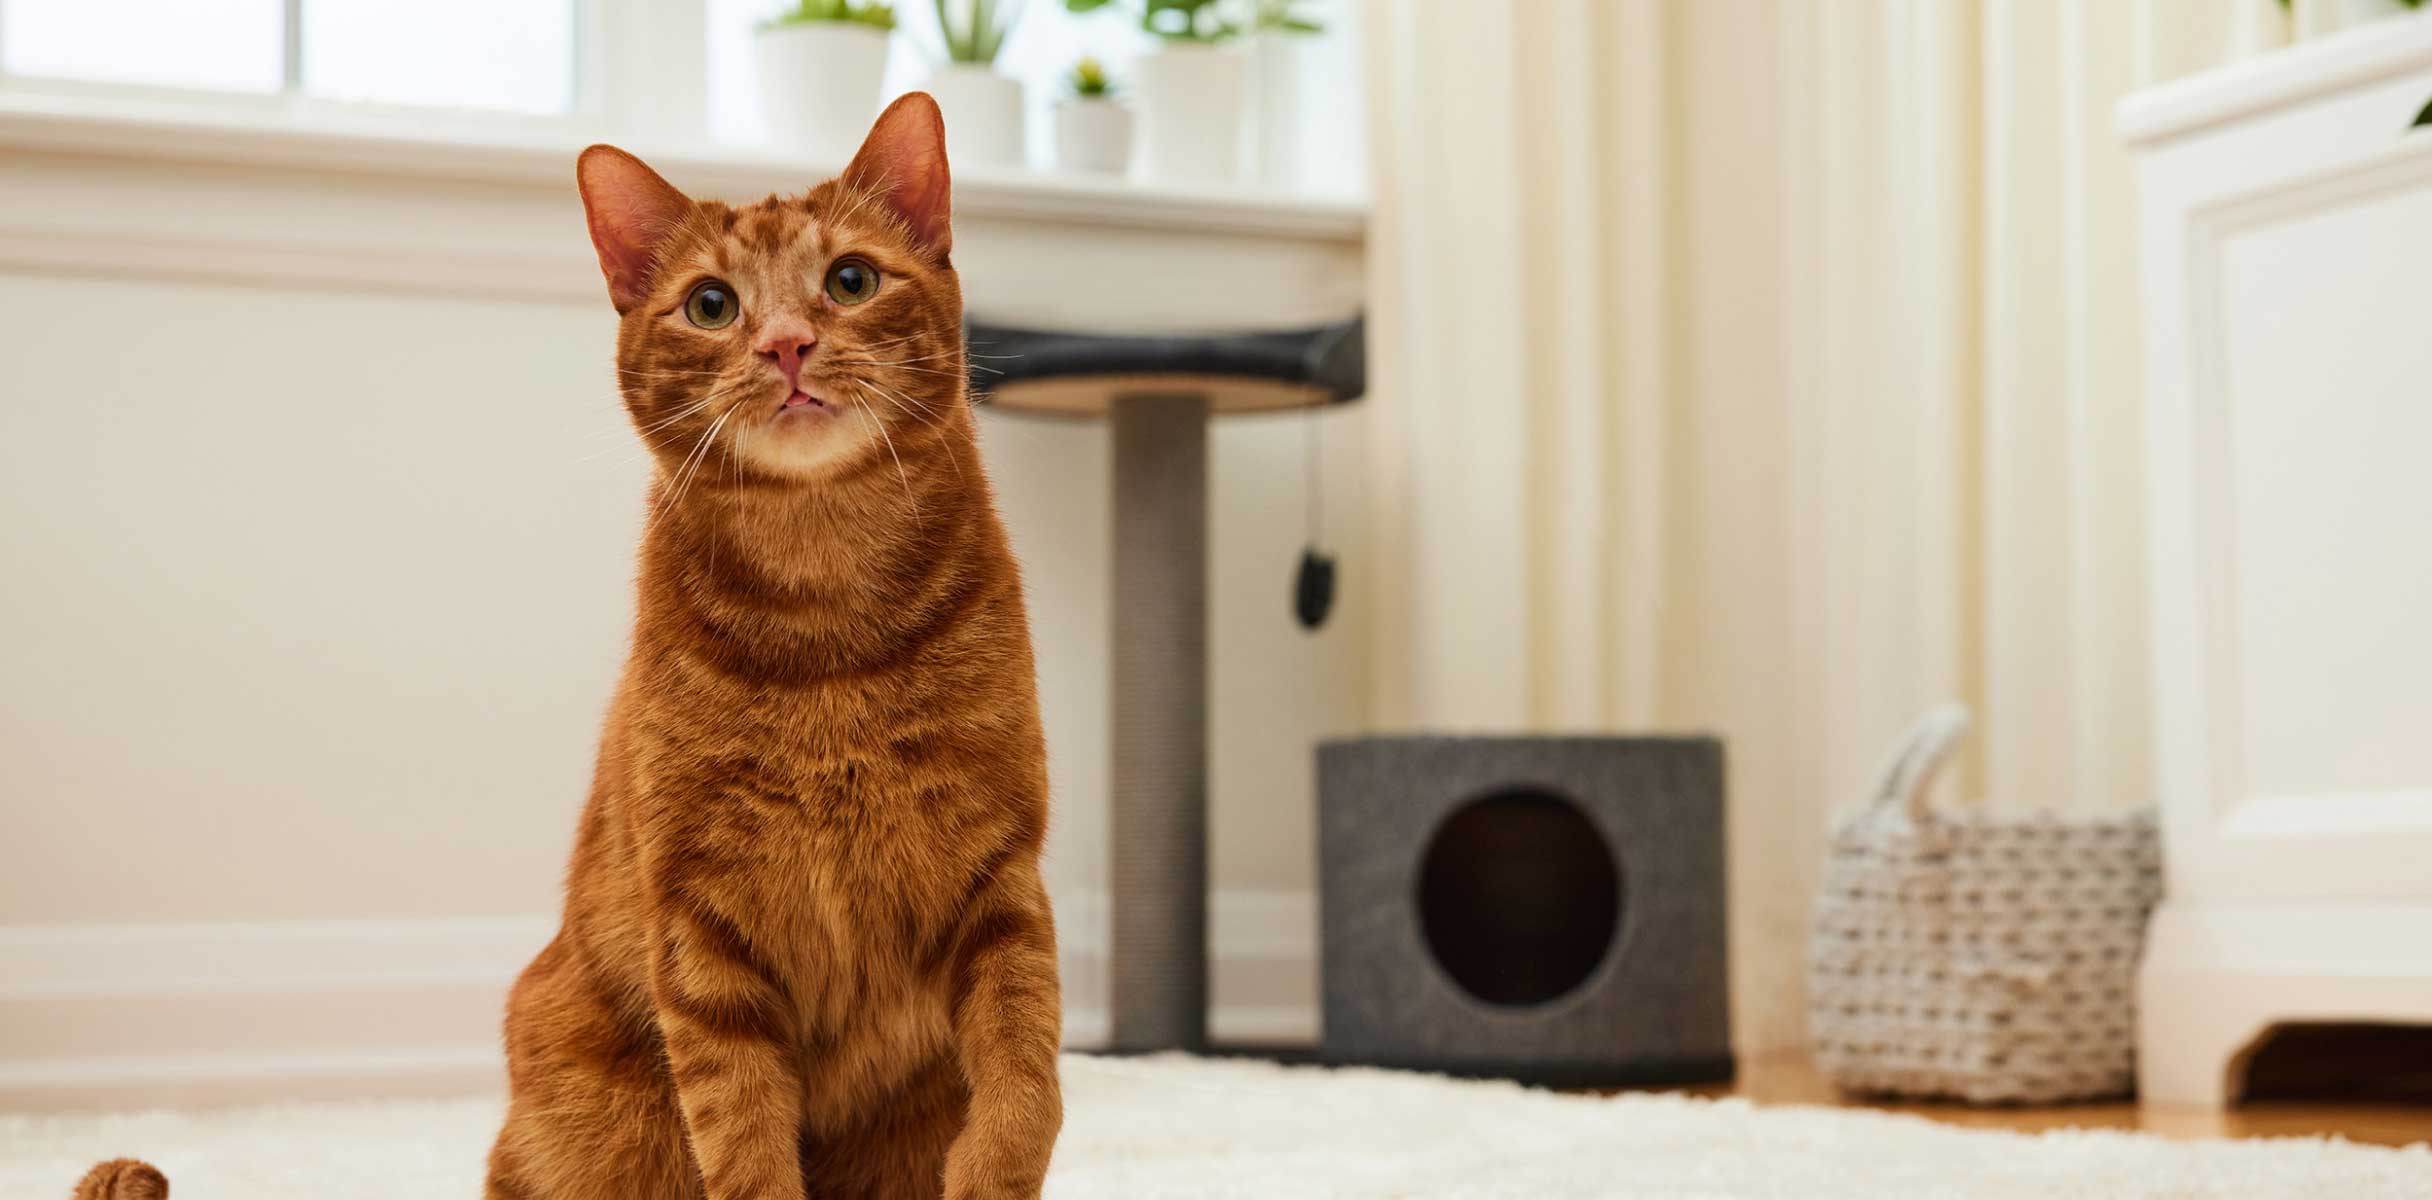 5 pet products that help prevent problems down the road - Cat sitting on a carpet